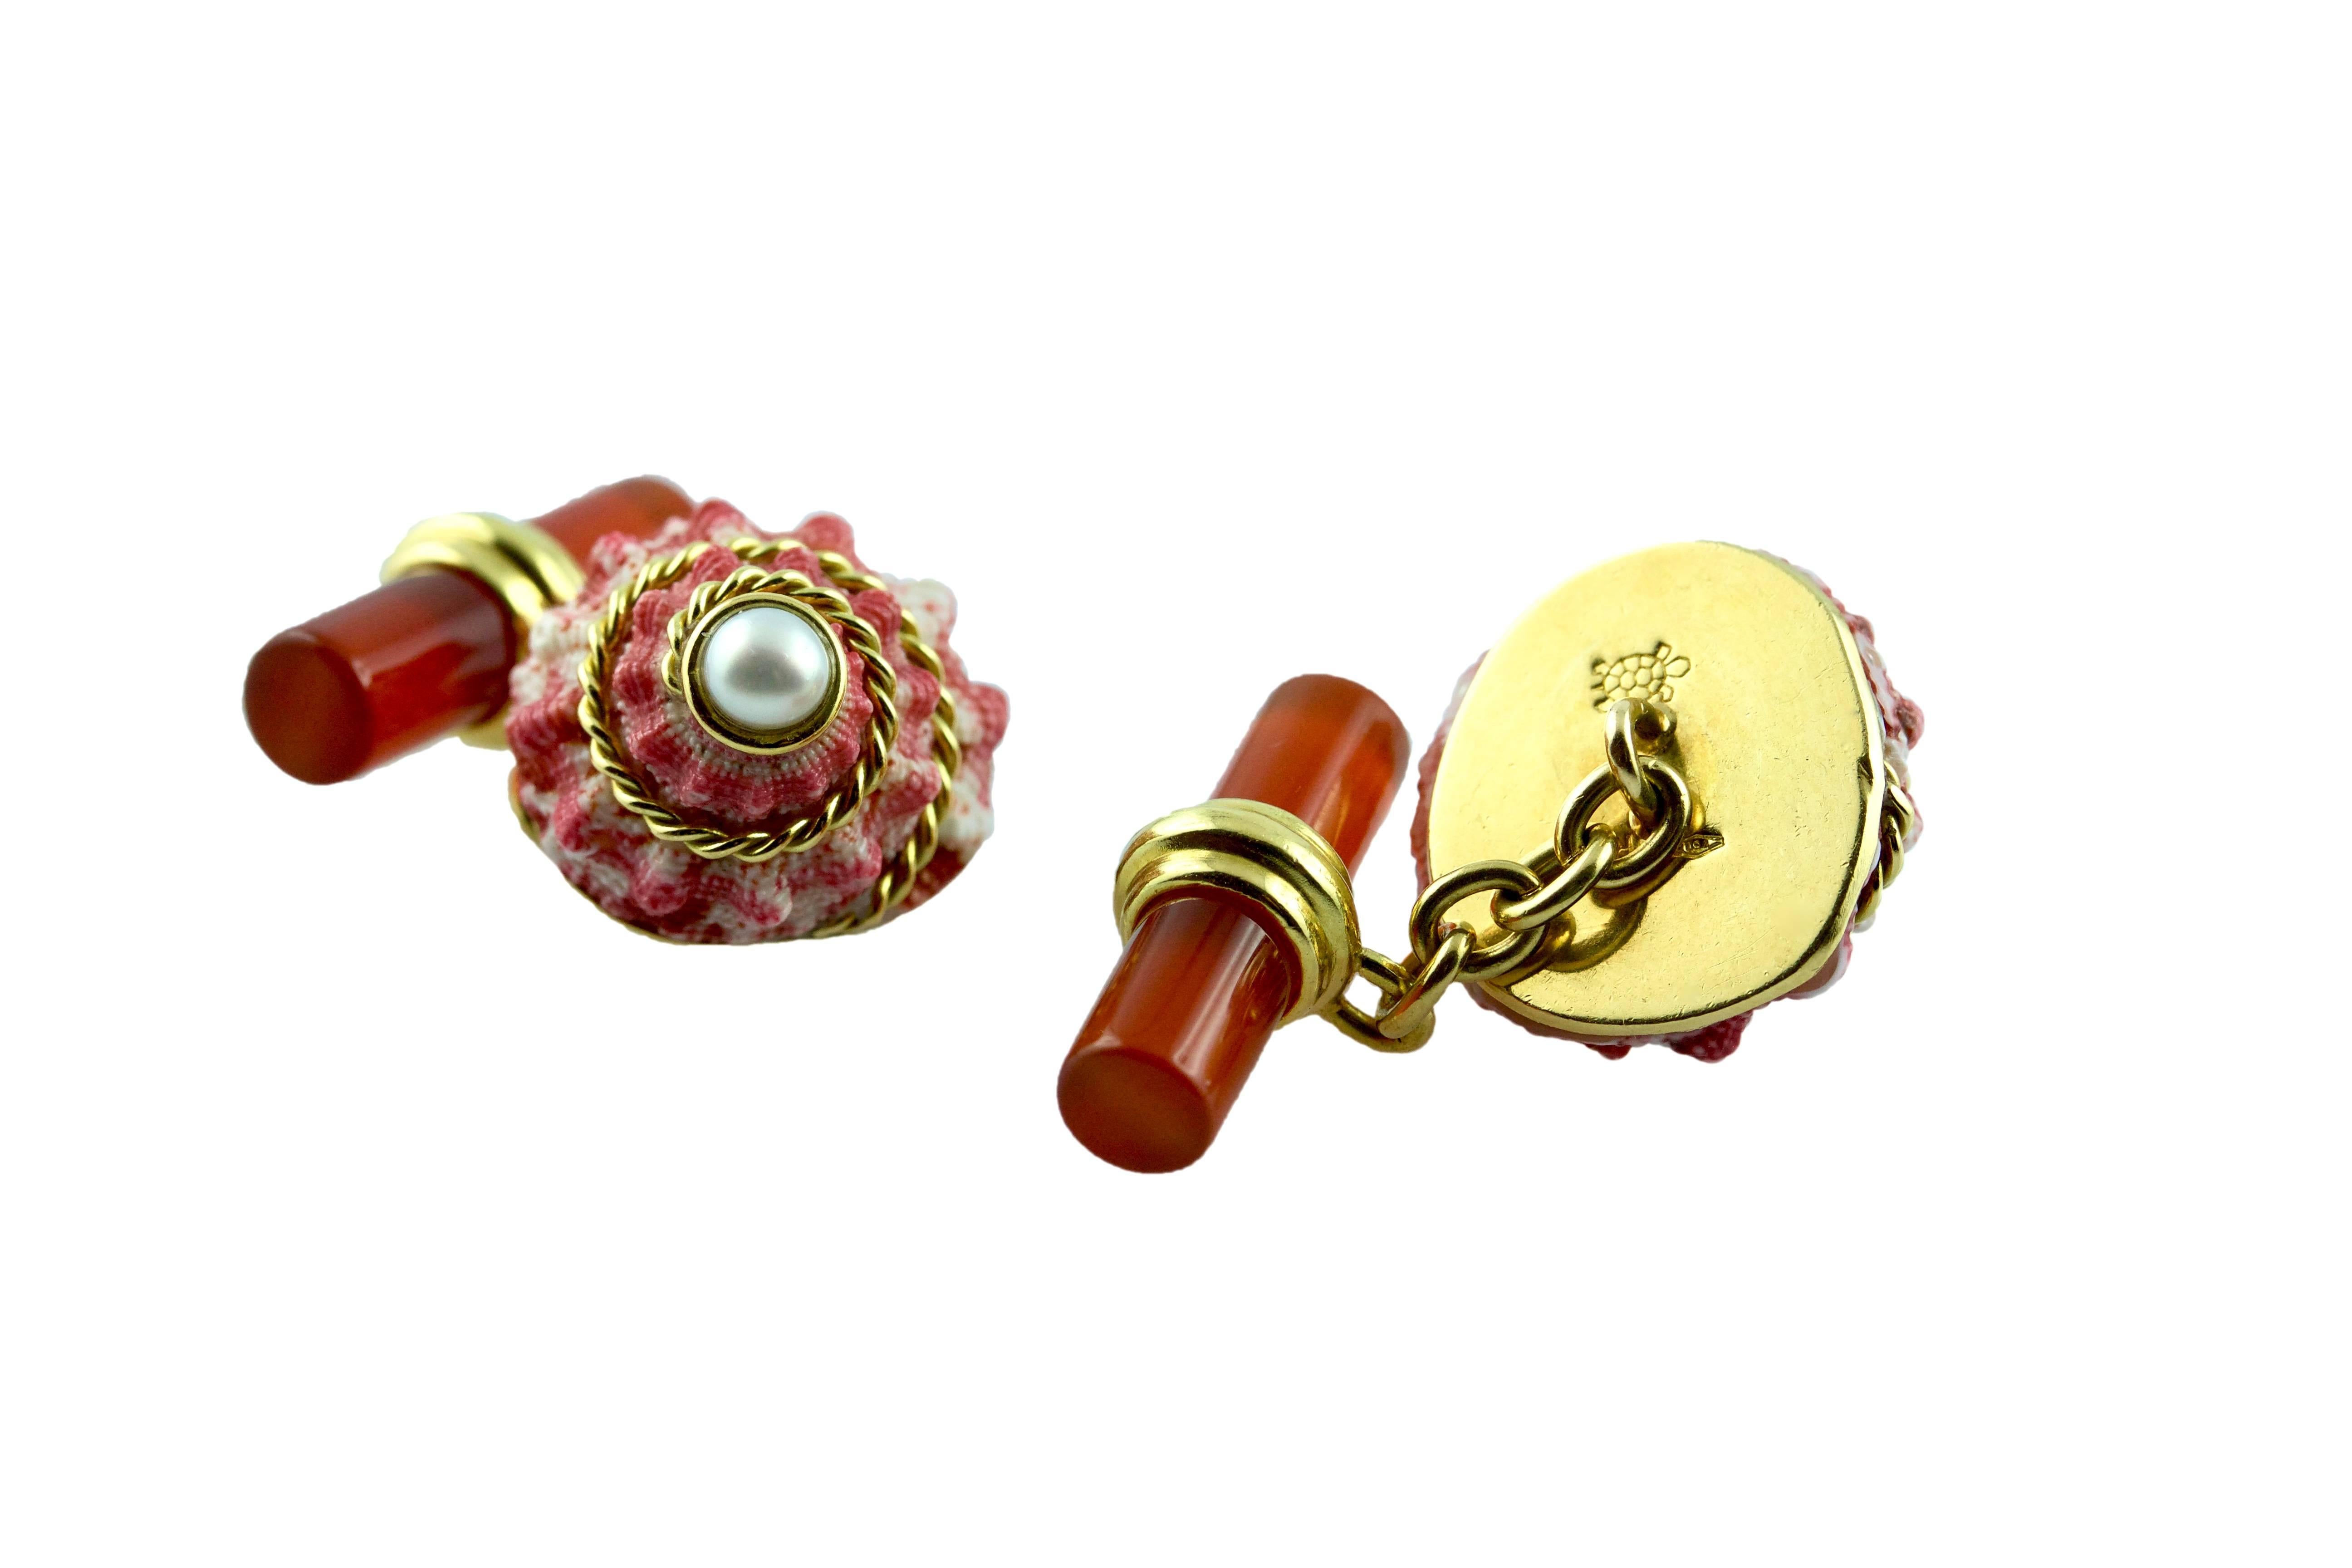 The striking red shade and the white natural texture of this shell, adorned with a pearl at the top and a 18k yellow gold torchon , is the protagonist of the front face of this elegant pair of cufflinks, which also features a cylindrical toggle in